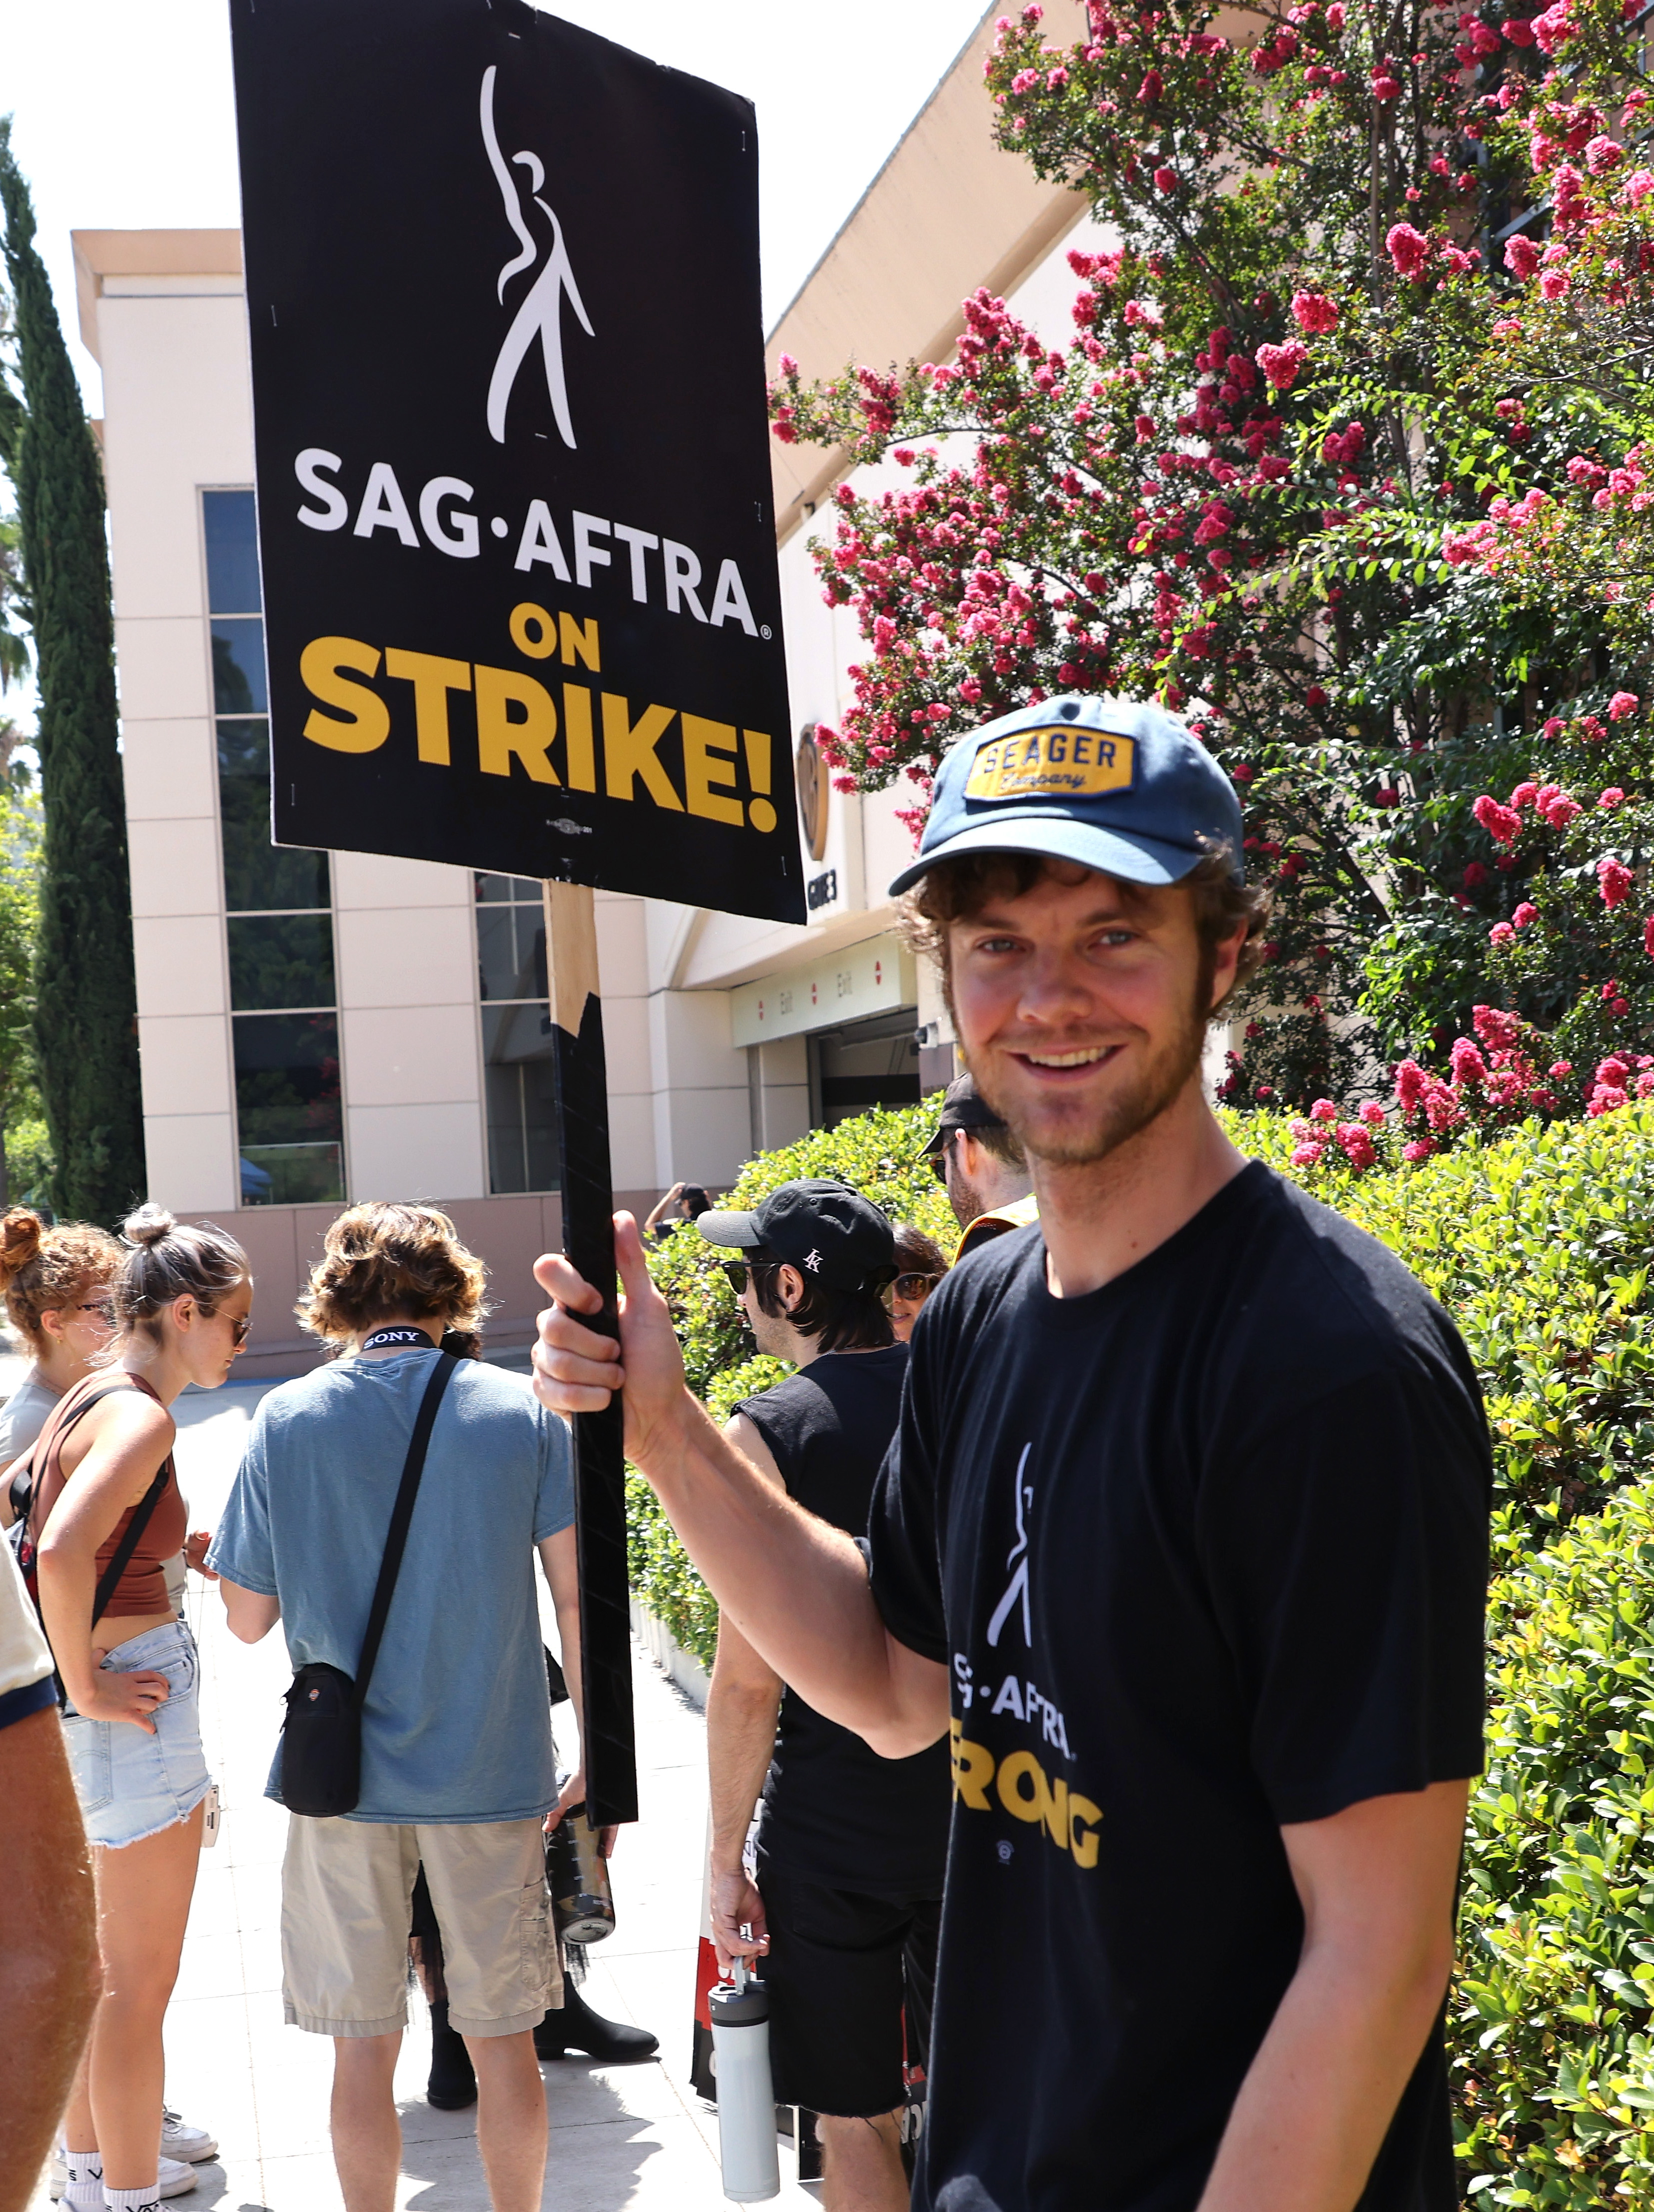 Jack smiling and holding up a picket sign